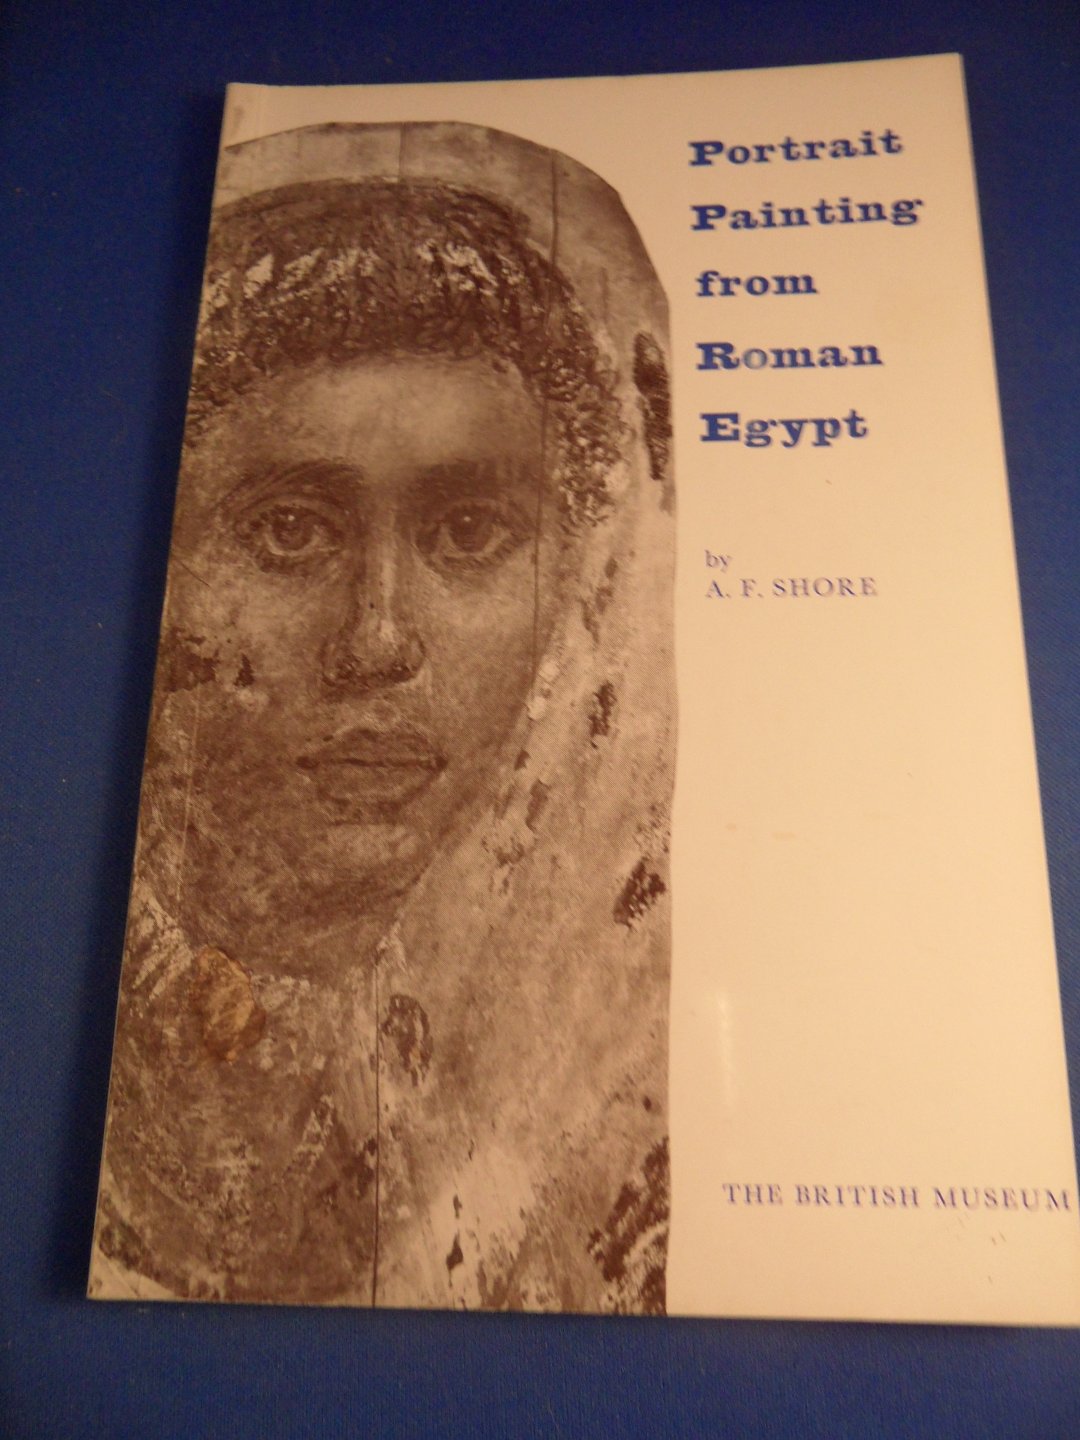 Shore, A.F. - Portrait Painting from Roman Egypt